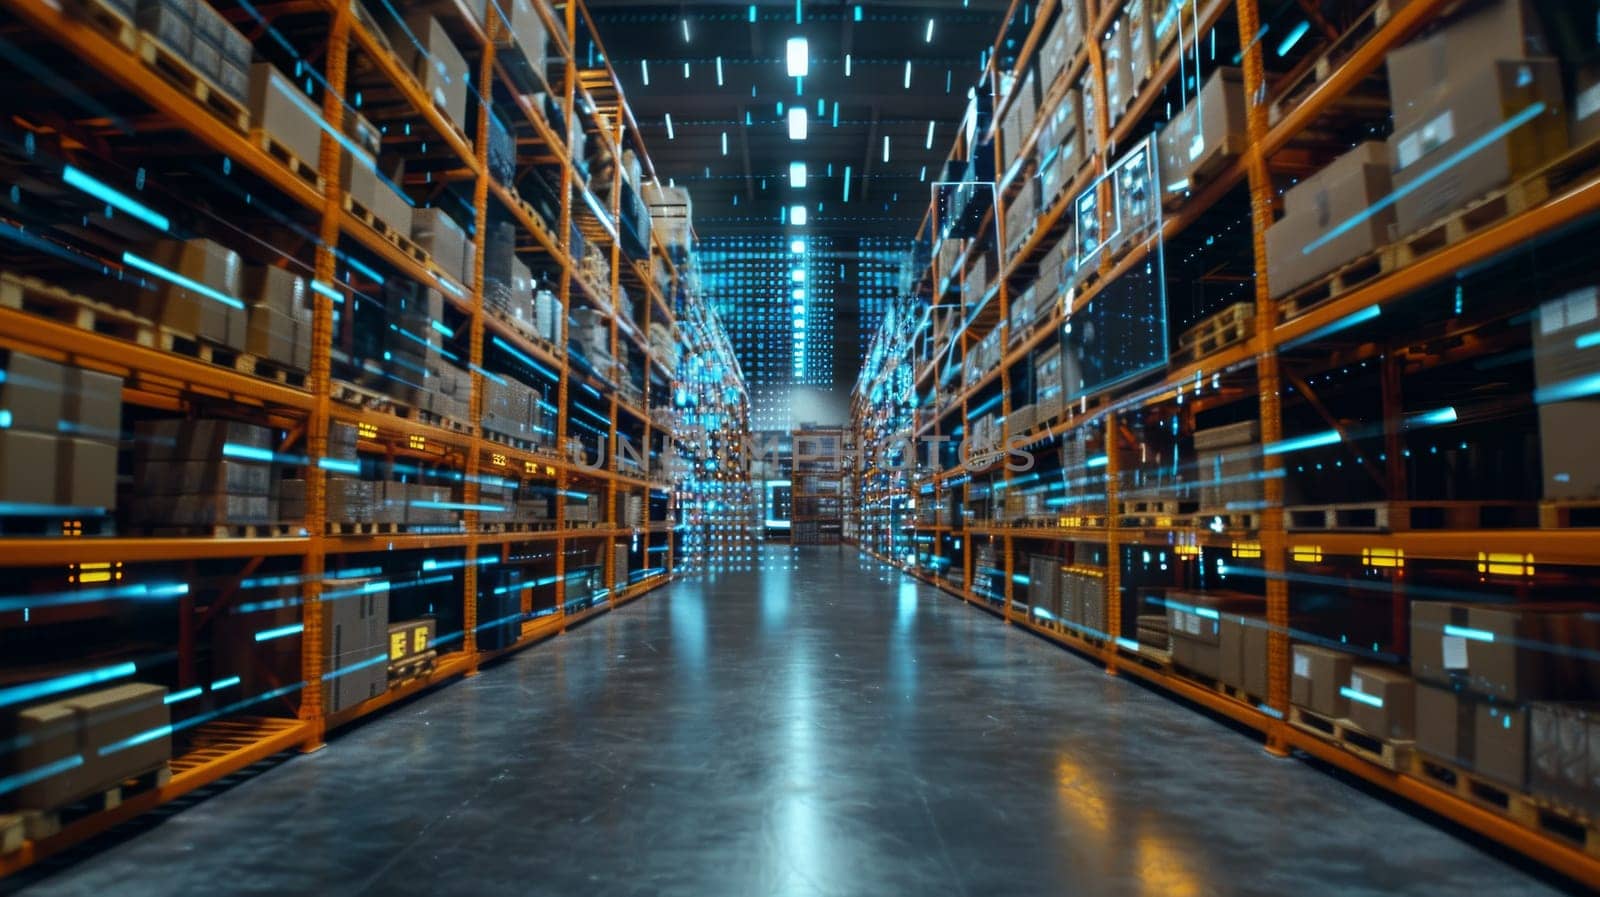 A warehouse with a lot of boxes and shelves. The boxes are stacked on top of each other and the shelves are filled with them. The warehouse is very large and has a lot of space